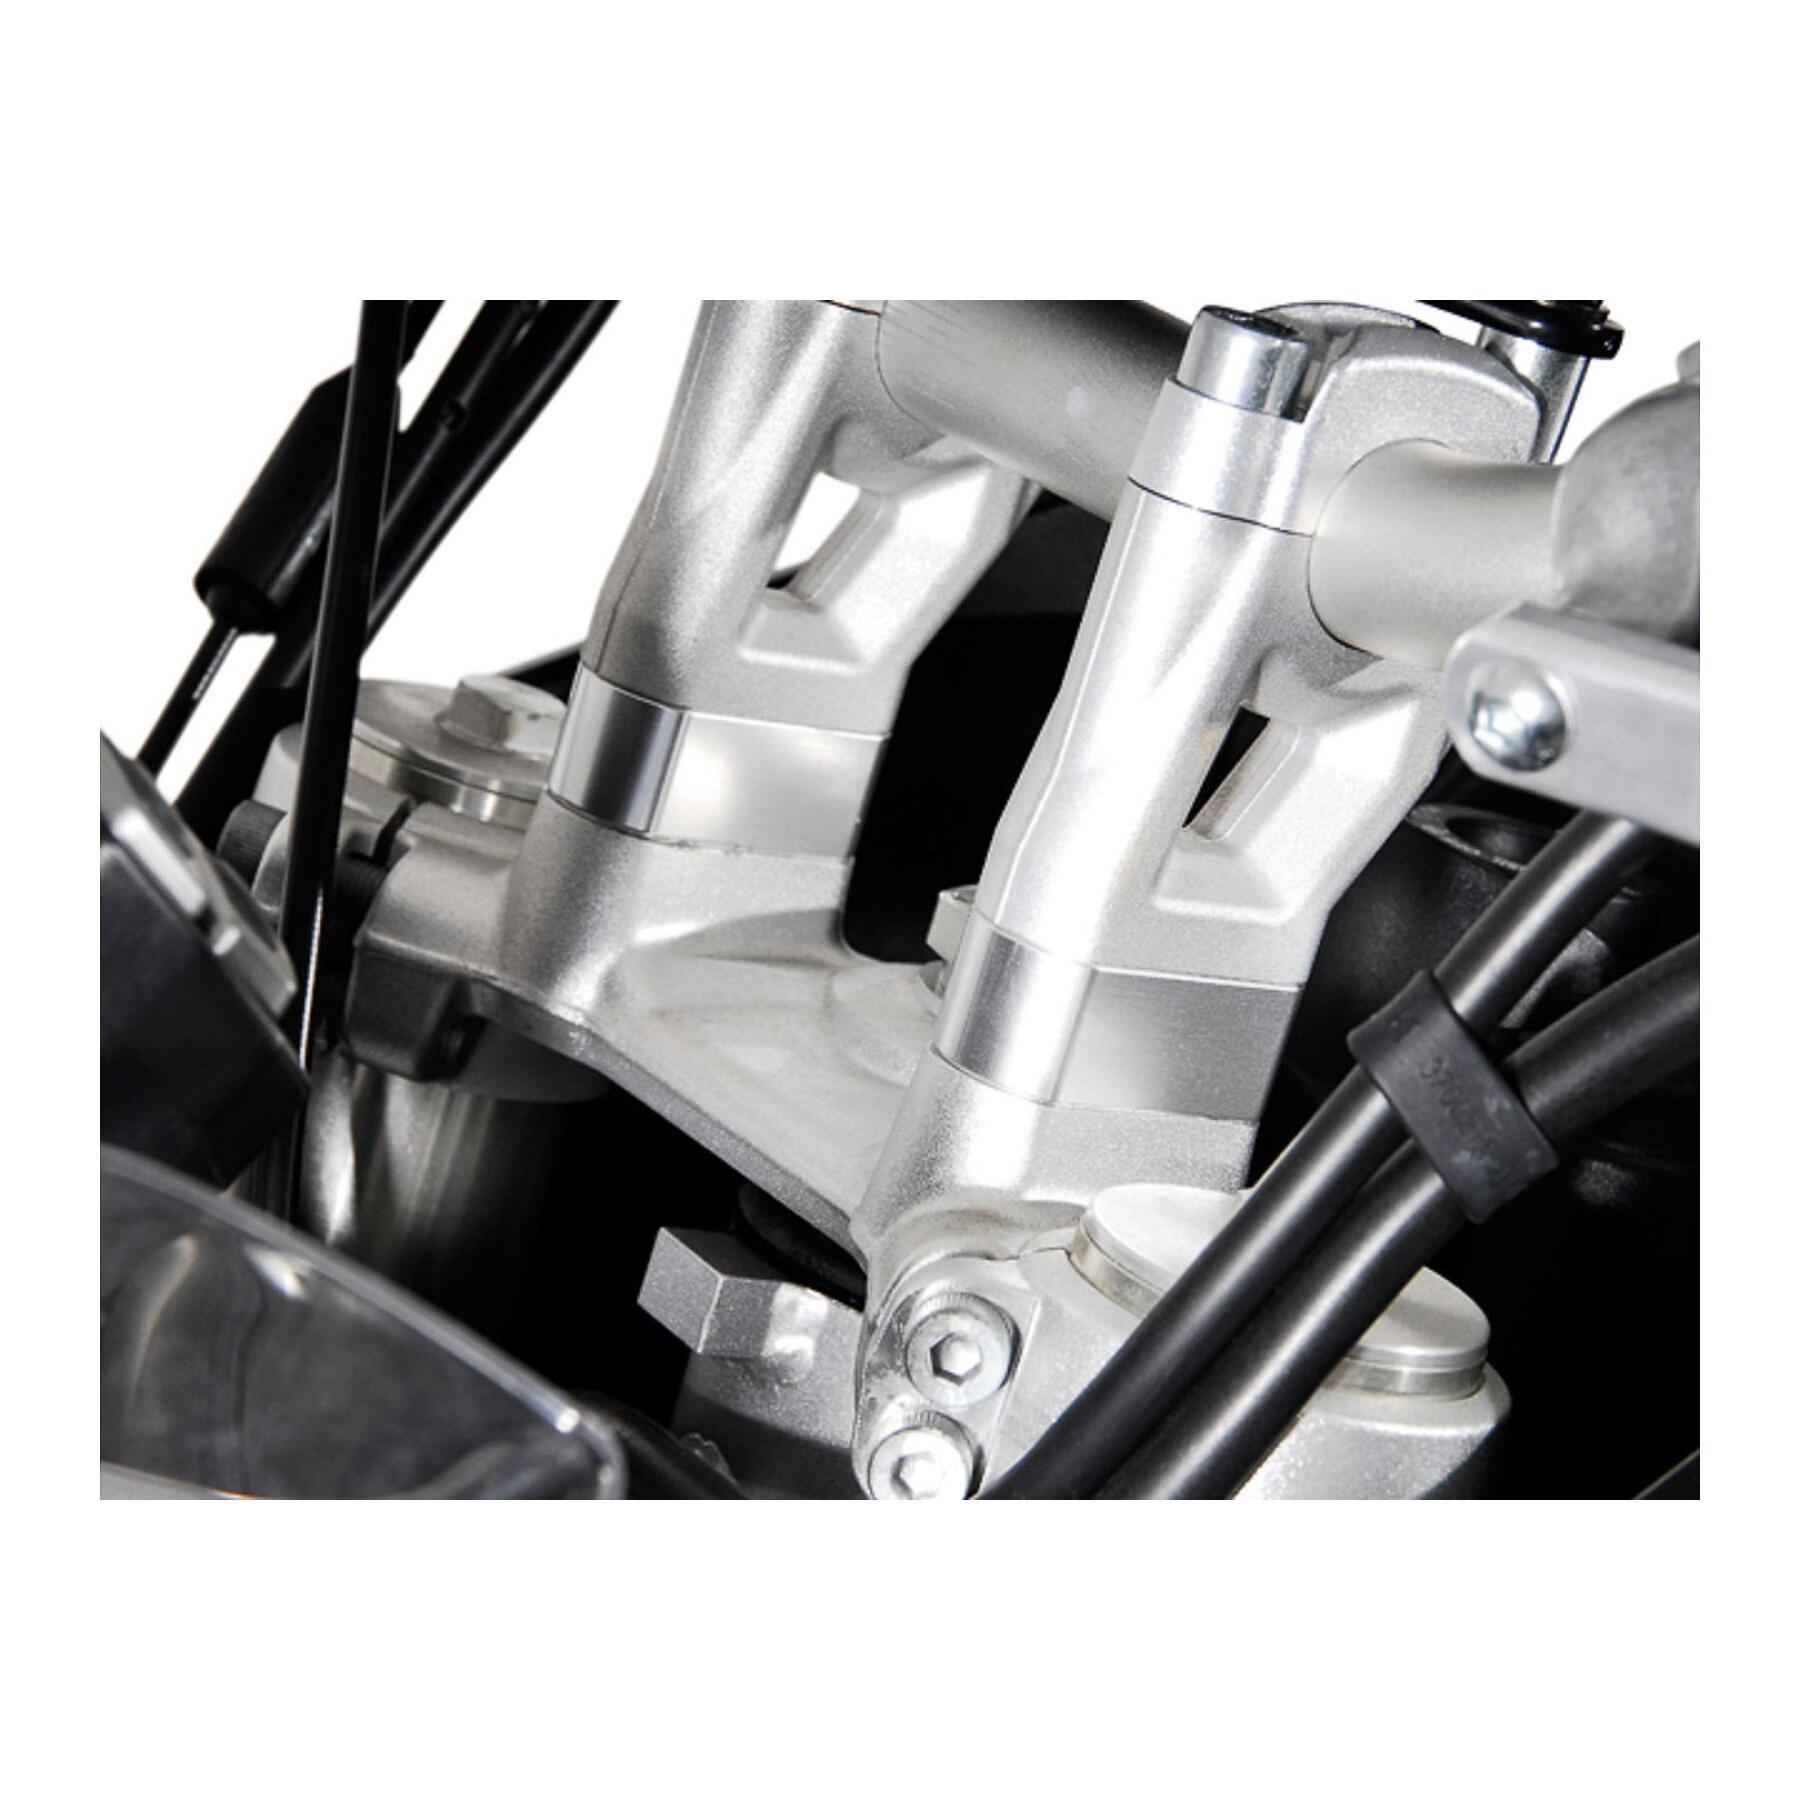 Motorcycle handlebar extensions h20 mm.models triumph tiger 800 / 1200 SW-Motech